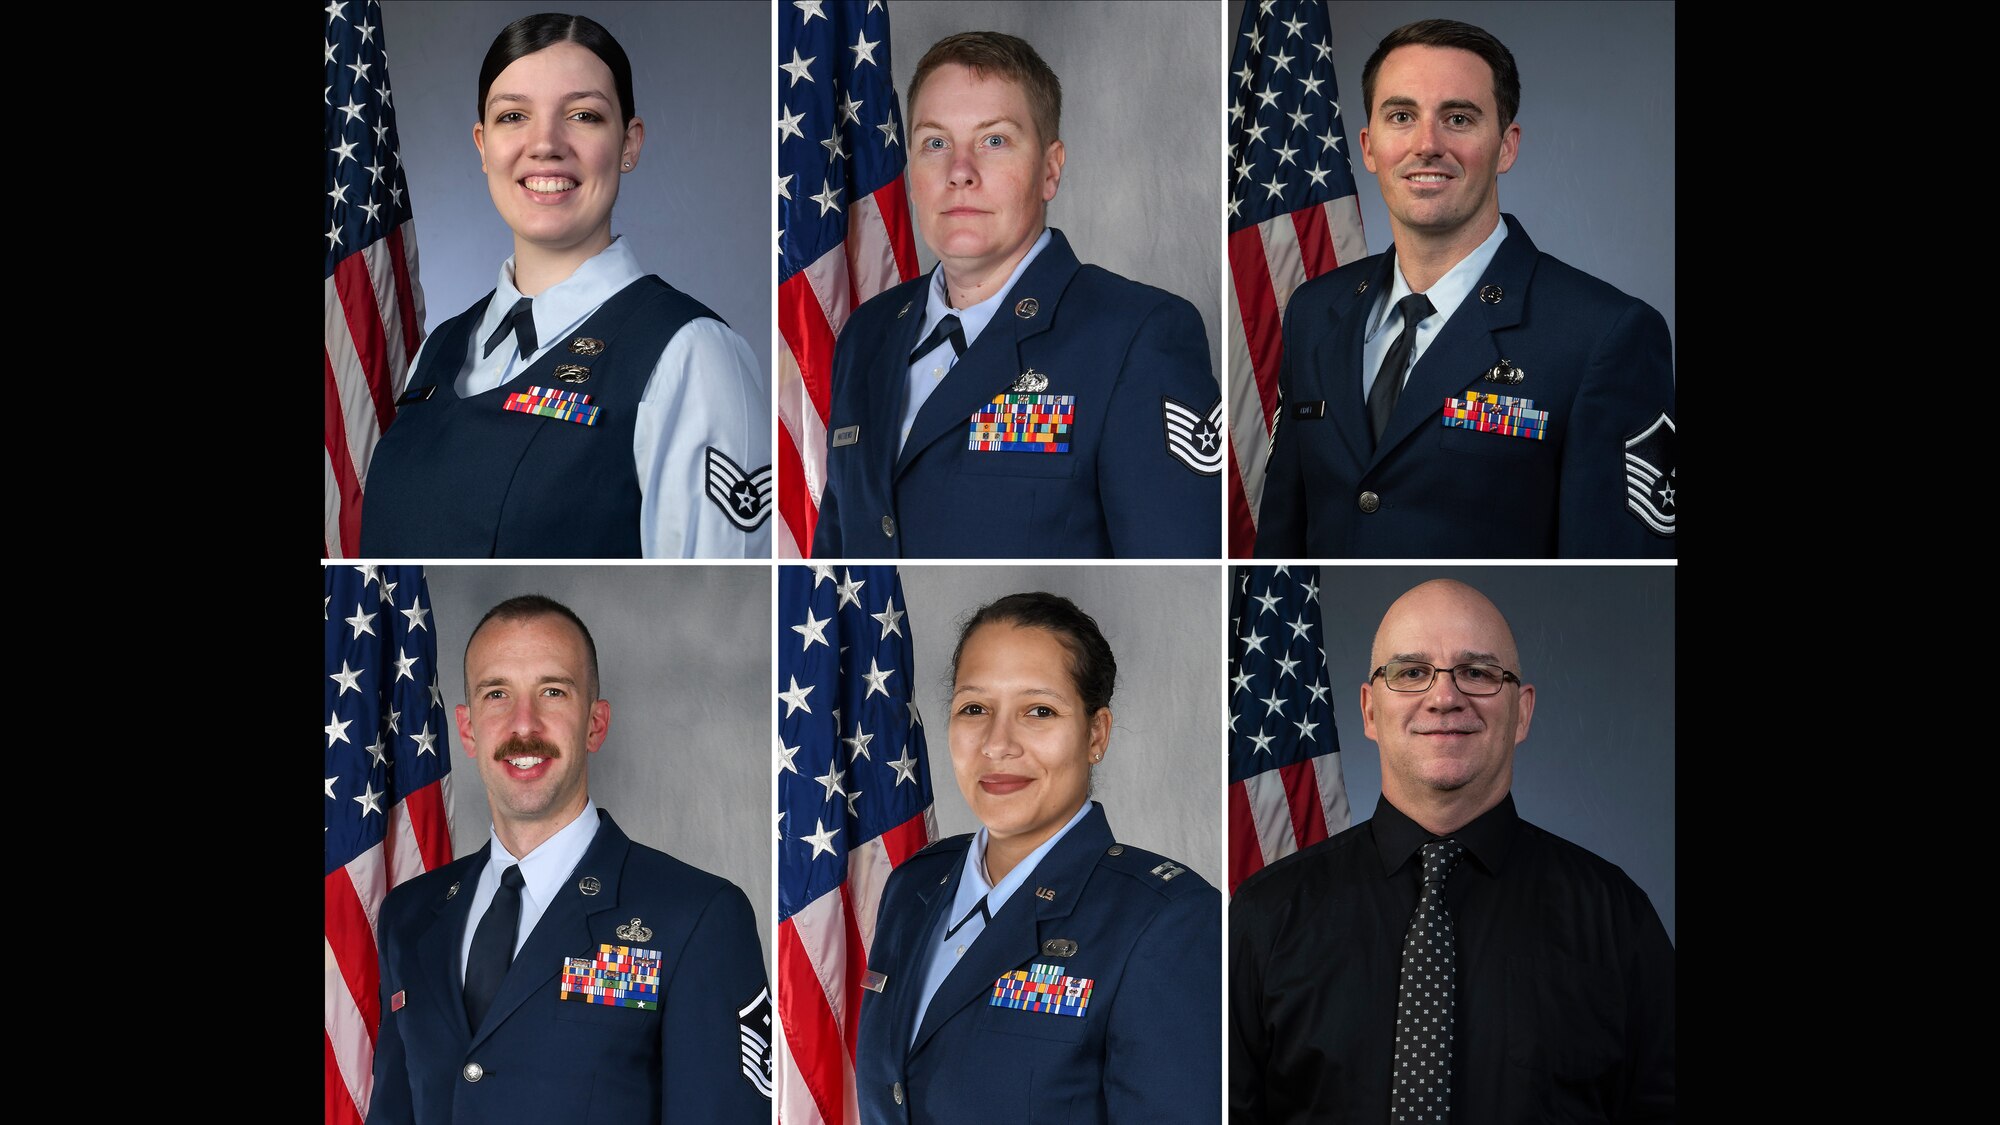 Collage depicting six individual portrait photographs of the 131st Bomb Wing's Outstanding Airmen of the Year.